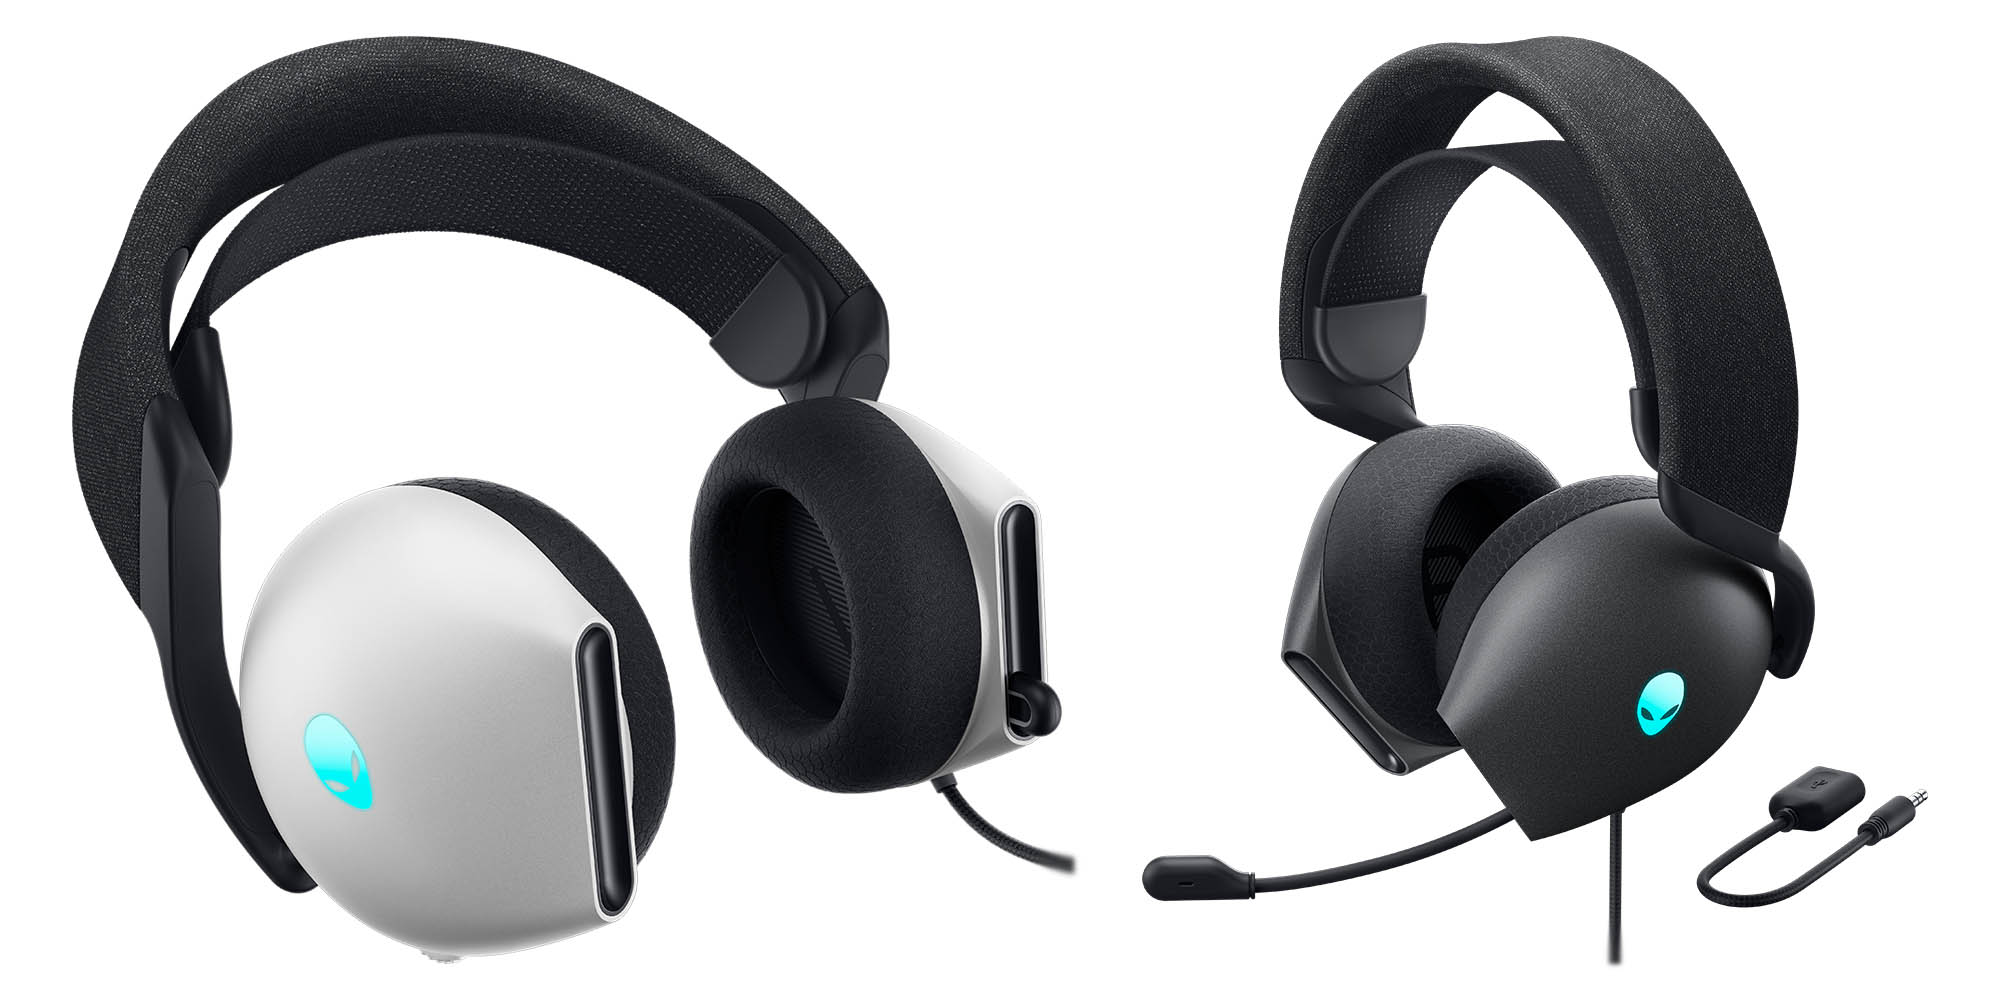 Alienware AW520H Wired Gaming Headset